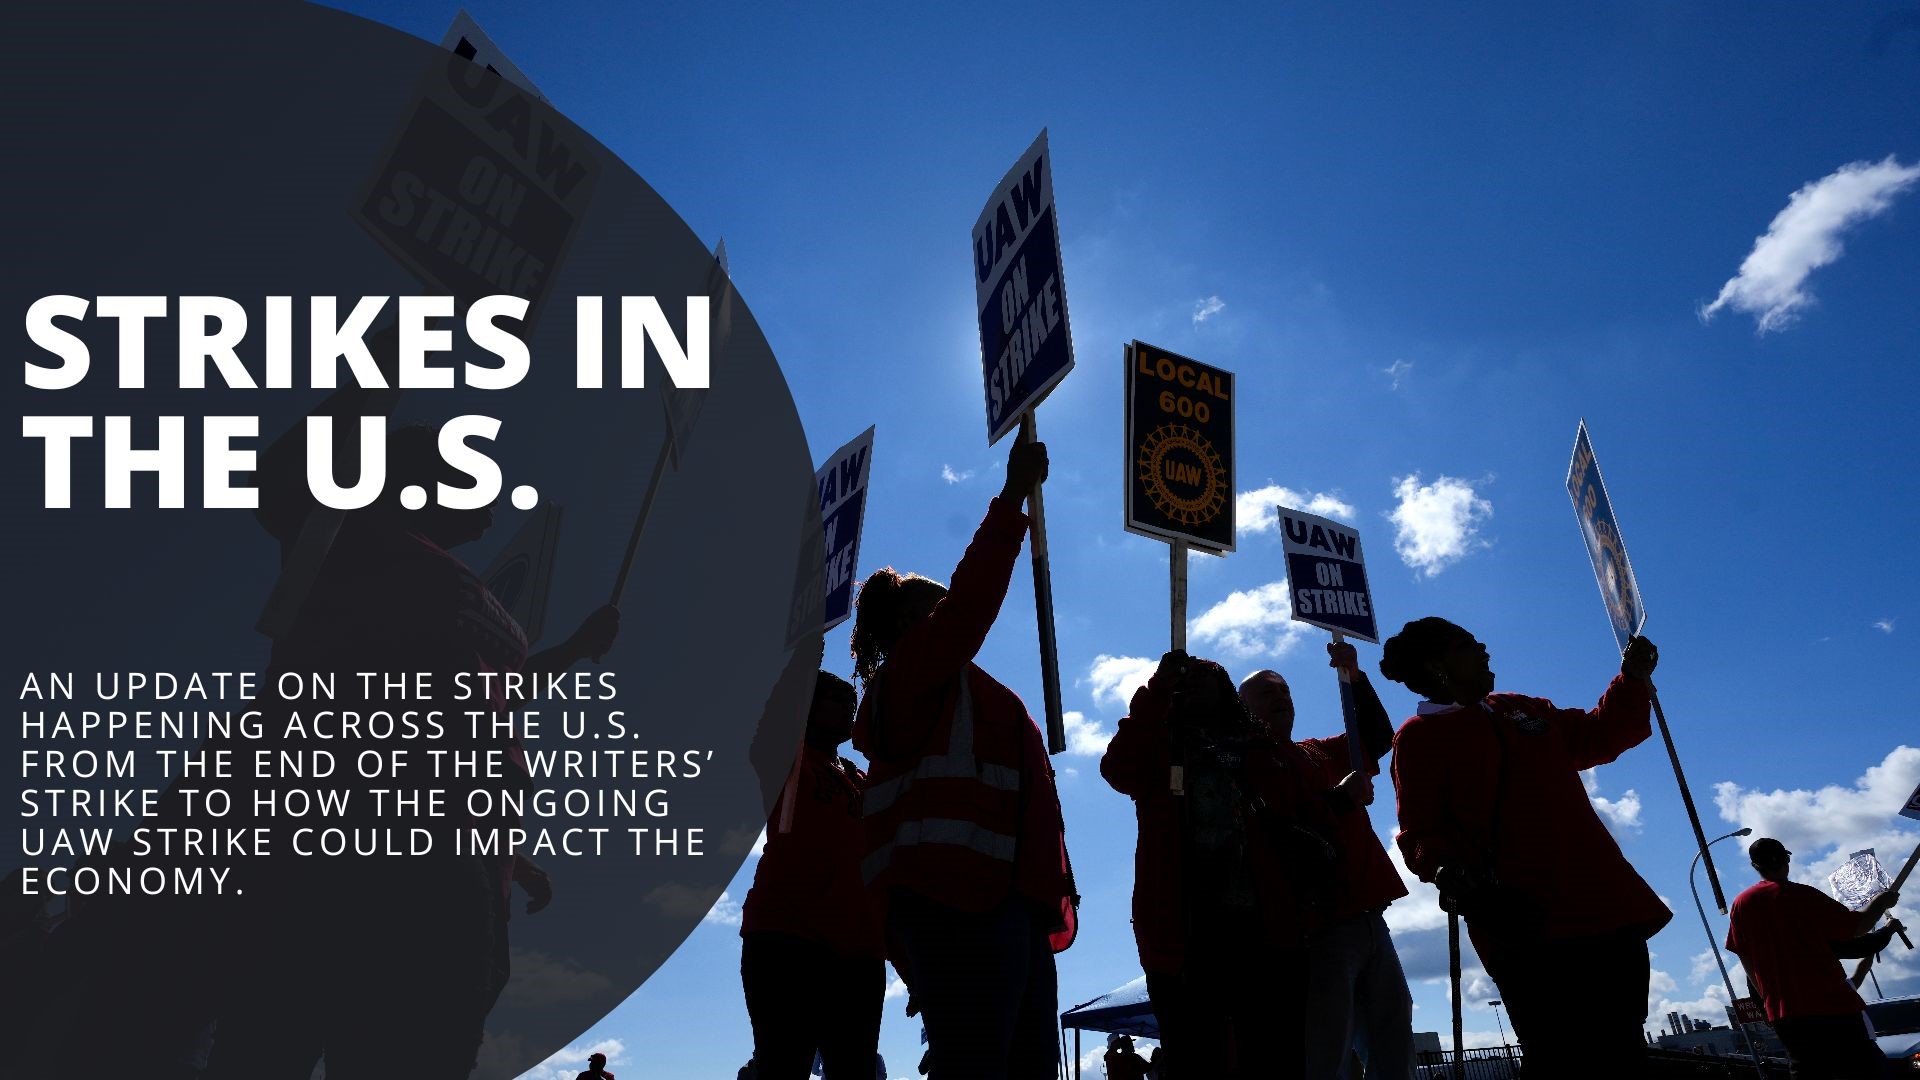 An update on the strikes happening across the U.S. From the end of the writers’ strike to how the ongoing UAW strike could impact the economy.